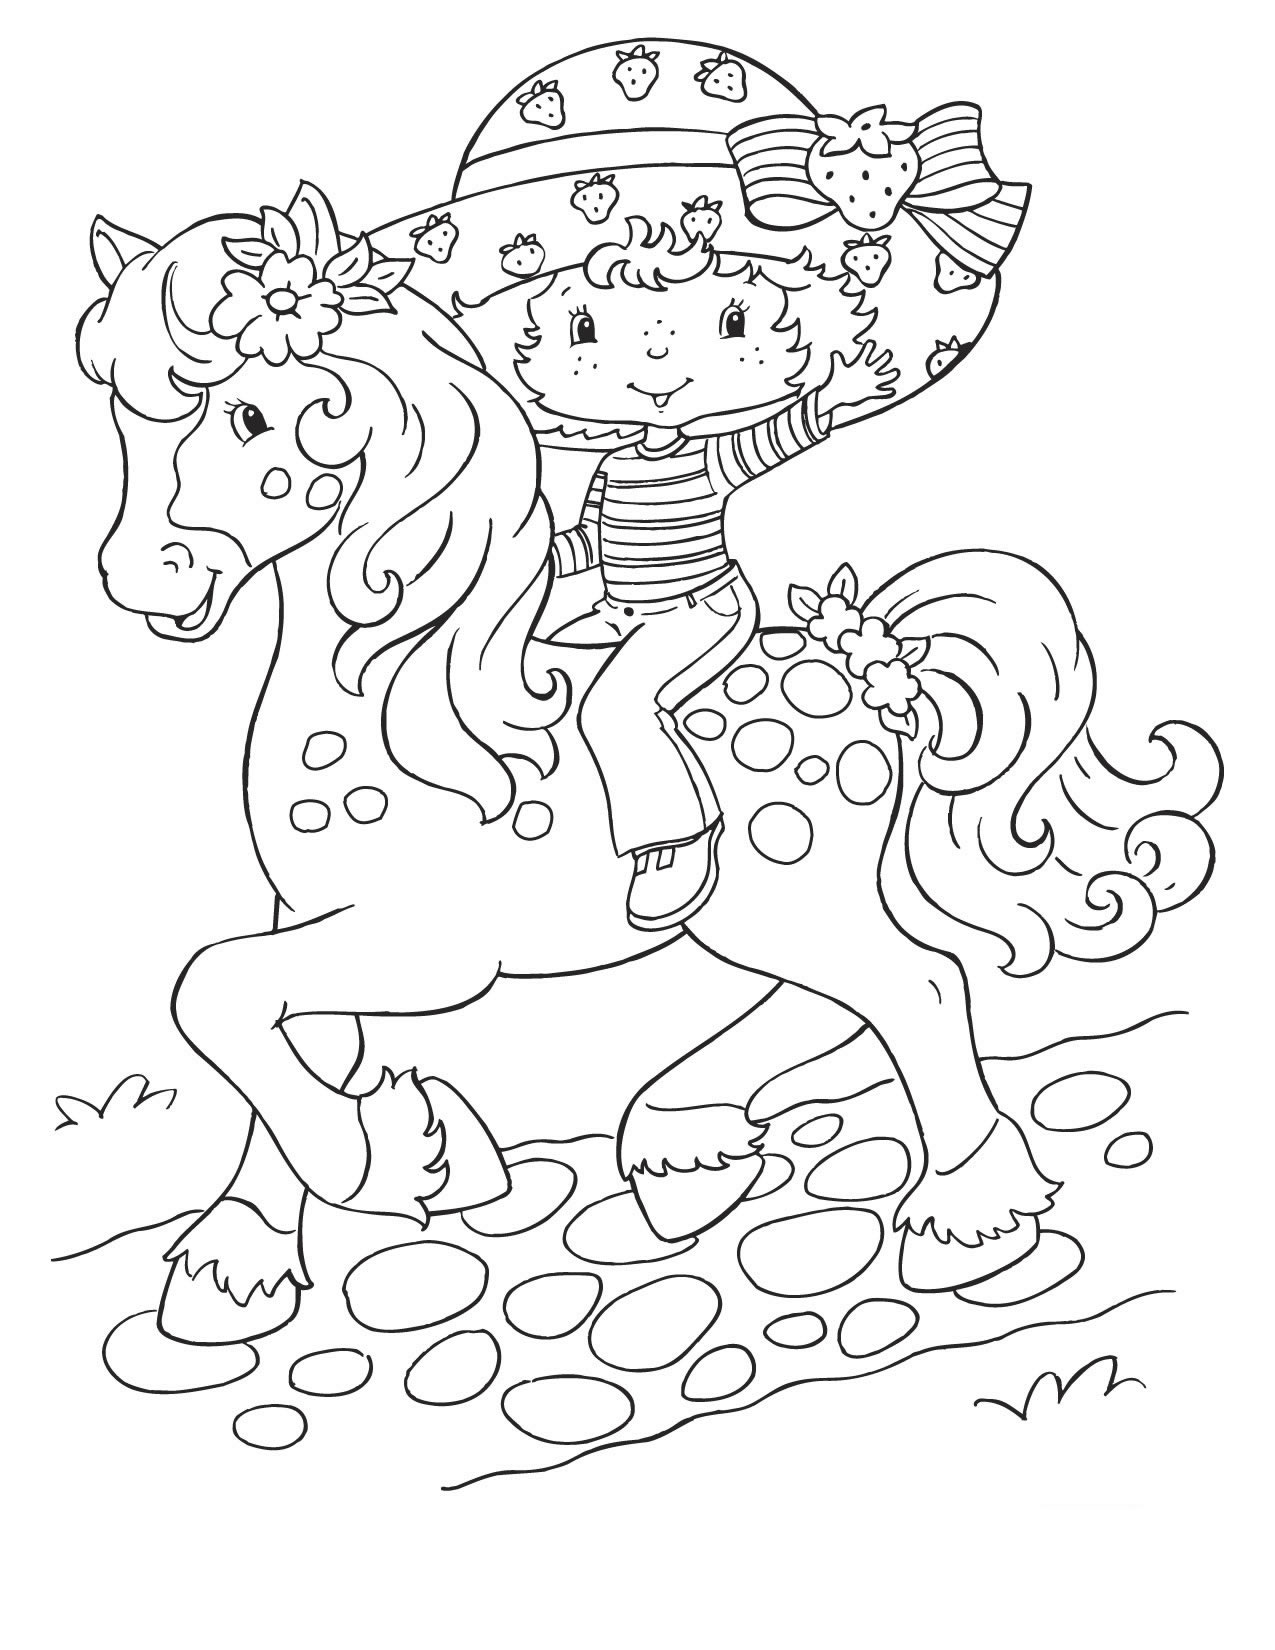 Strawberry shortcake to color for kids Strawberry